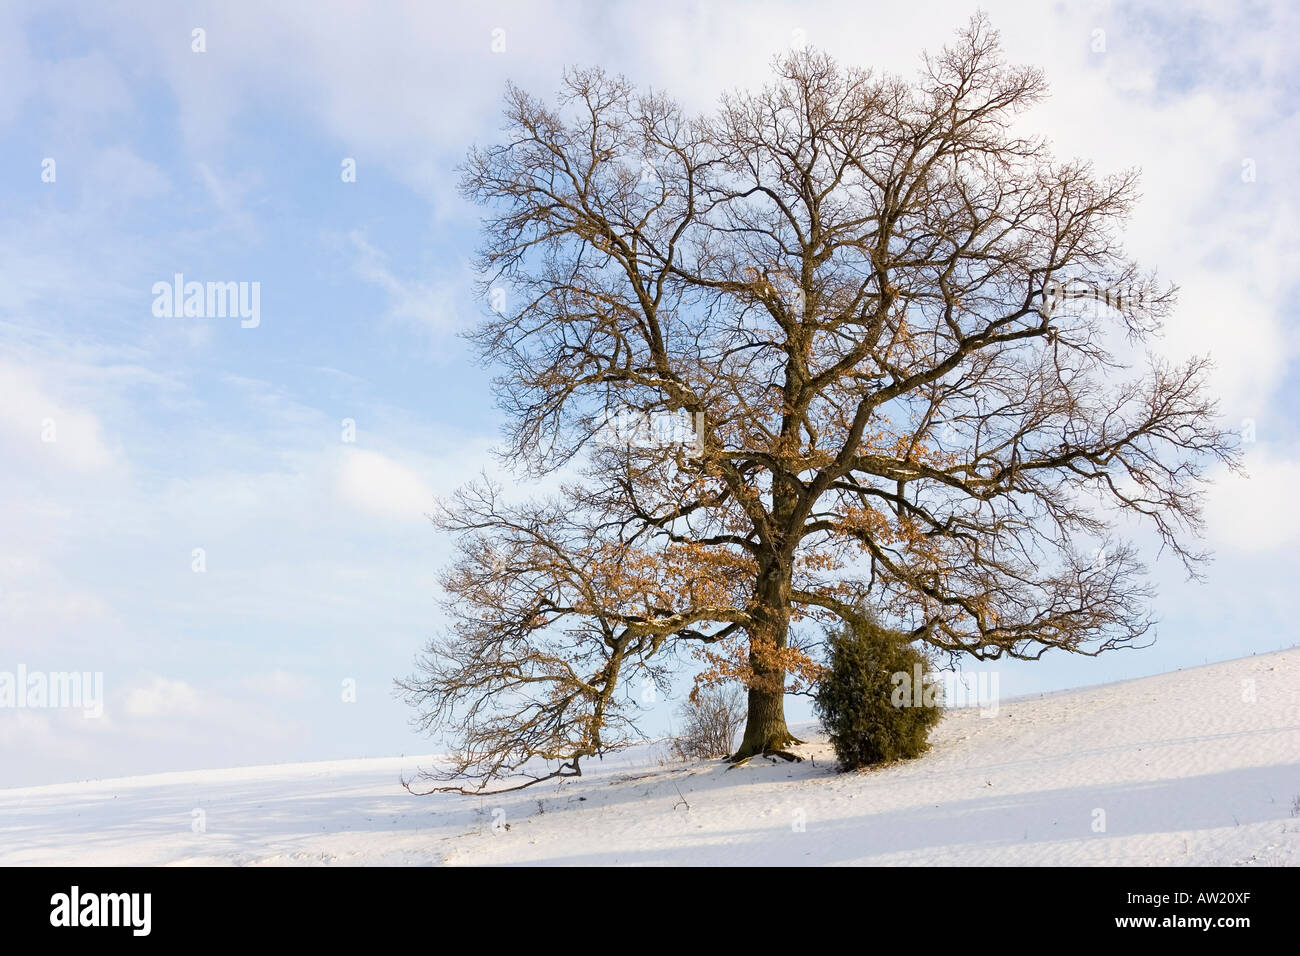 A broad-leafed tree and a bush on a snowy meadow Stock Photo